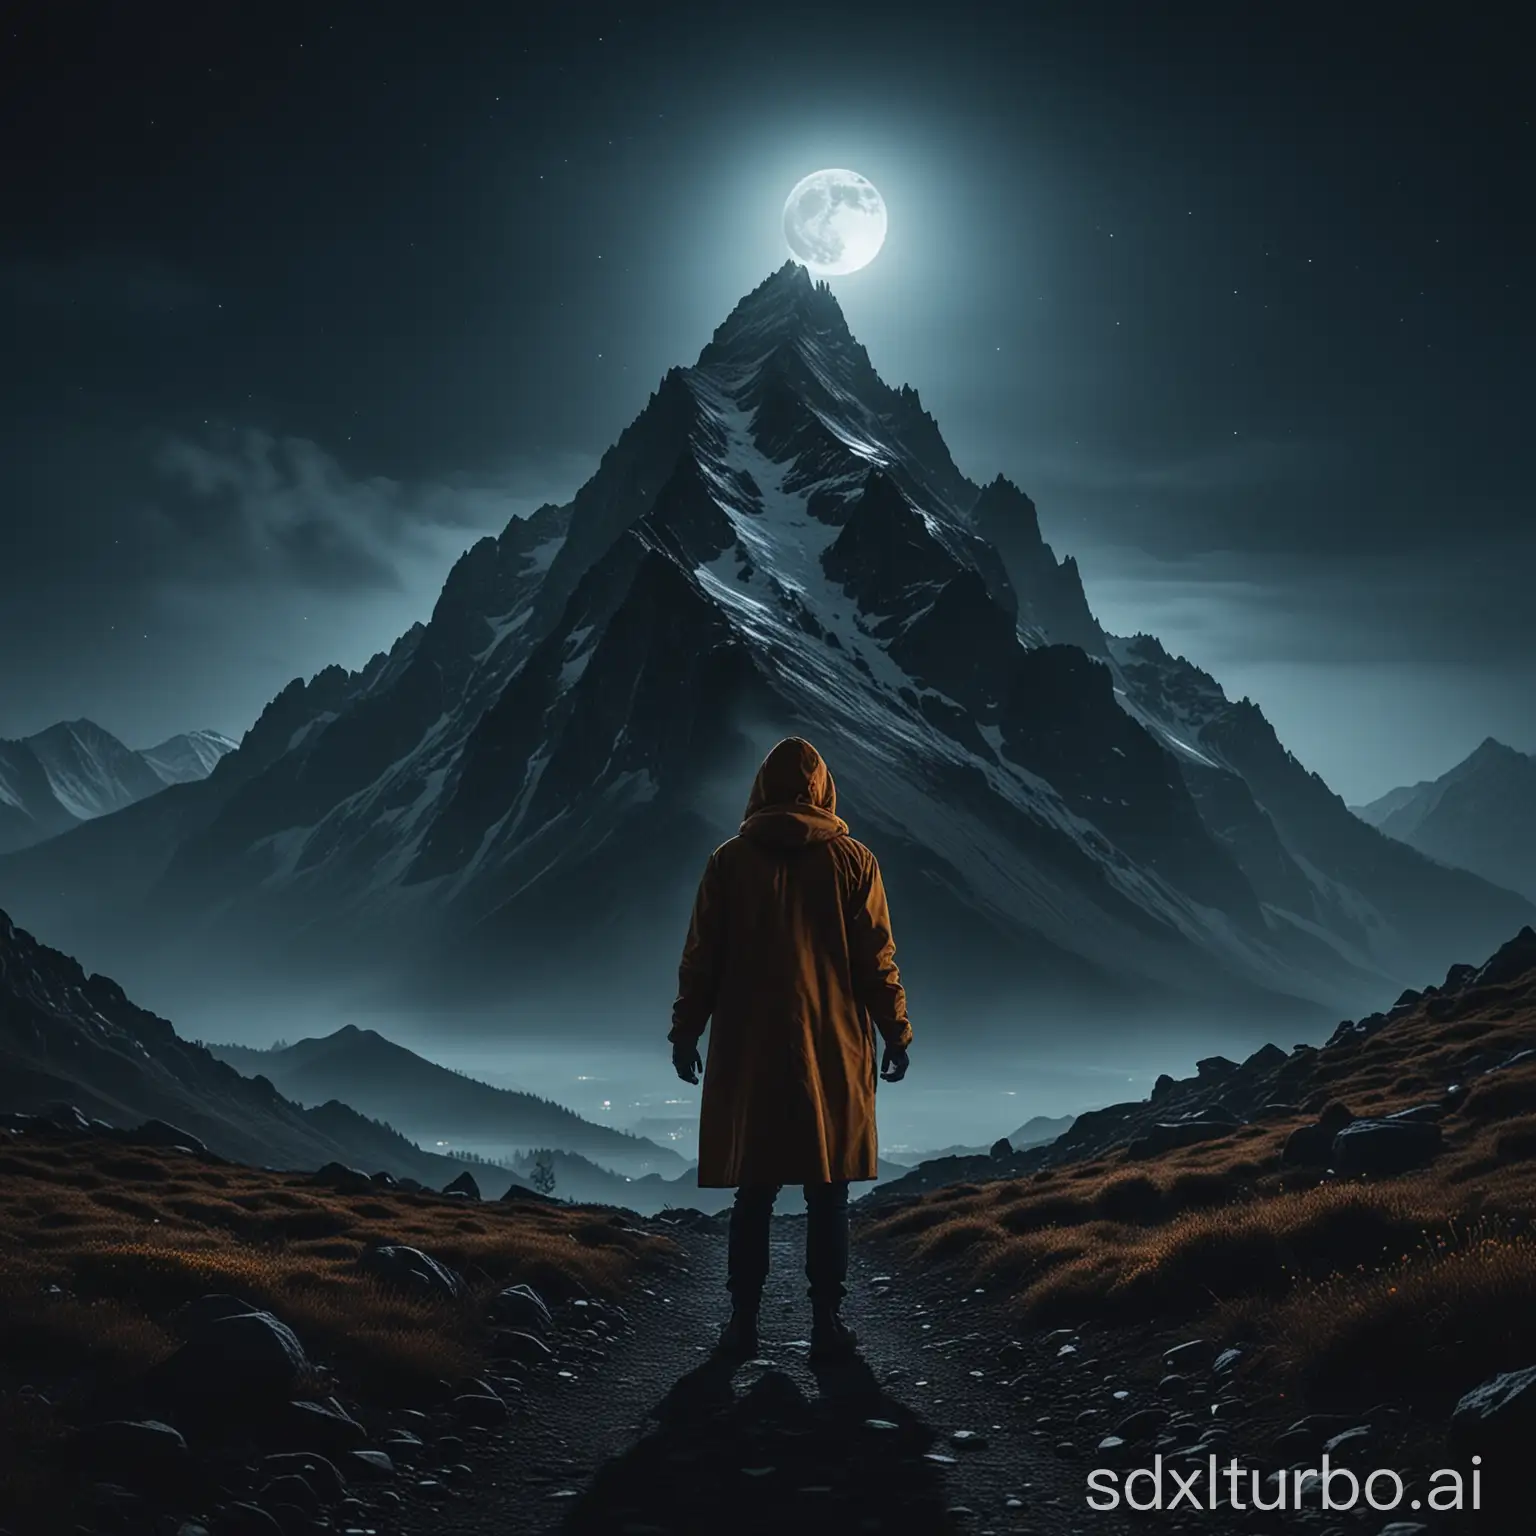 Mysterious-Moonlit-Mountain-Vivid-and-Atmospheric-Scary-Scene